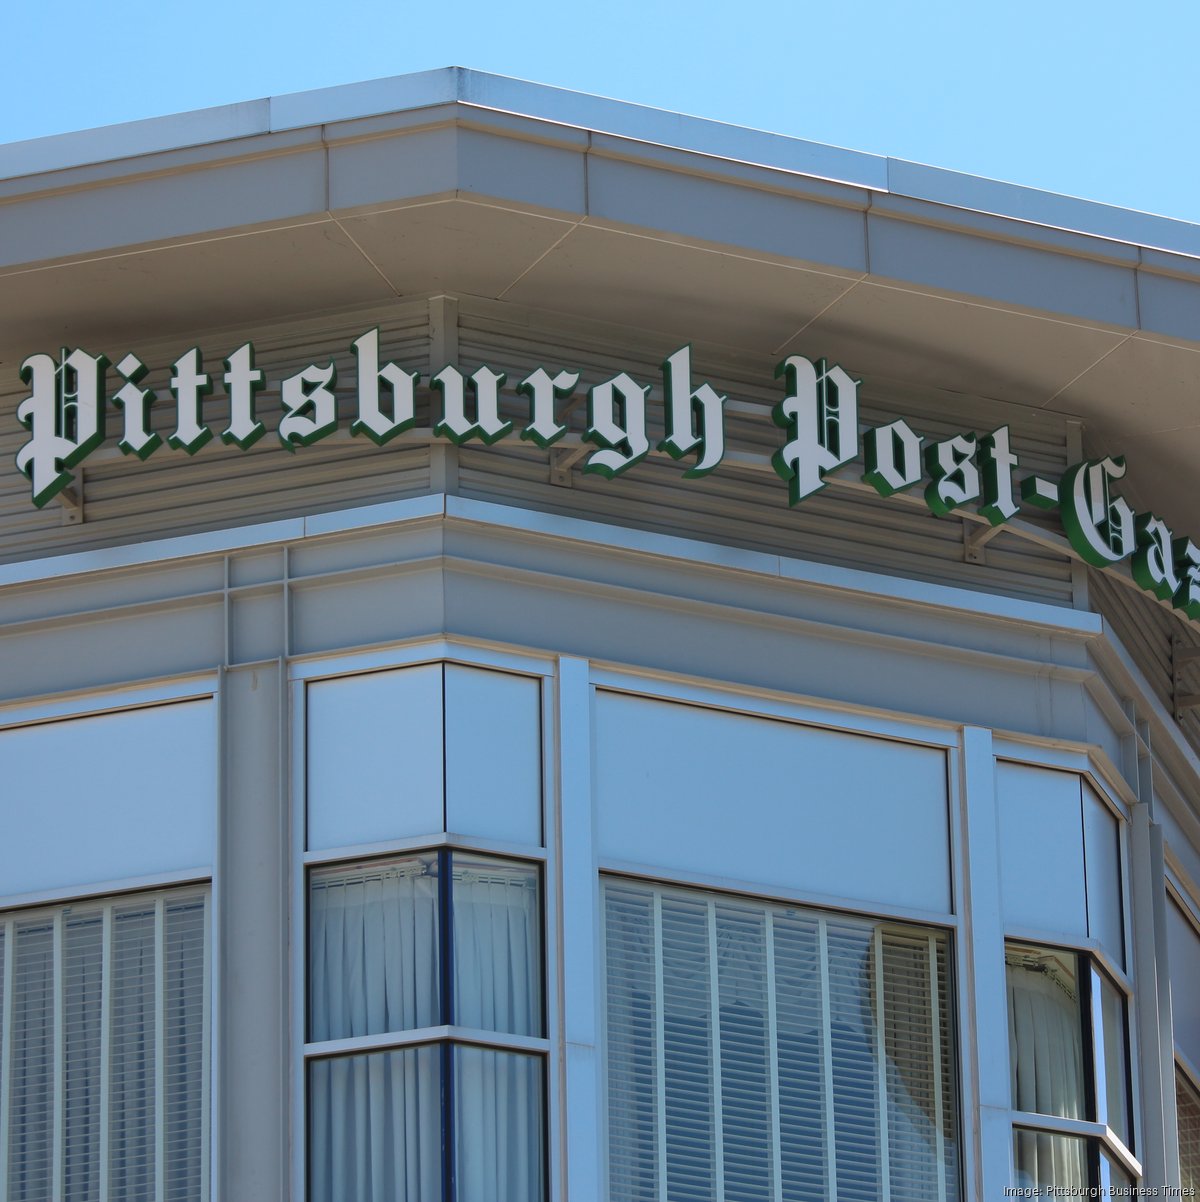 The Pitt News joins the fight with striking Post-Gazette workers